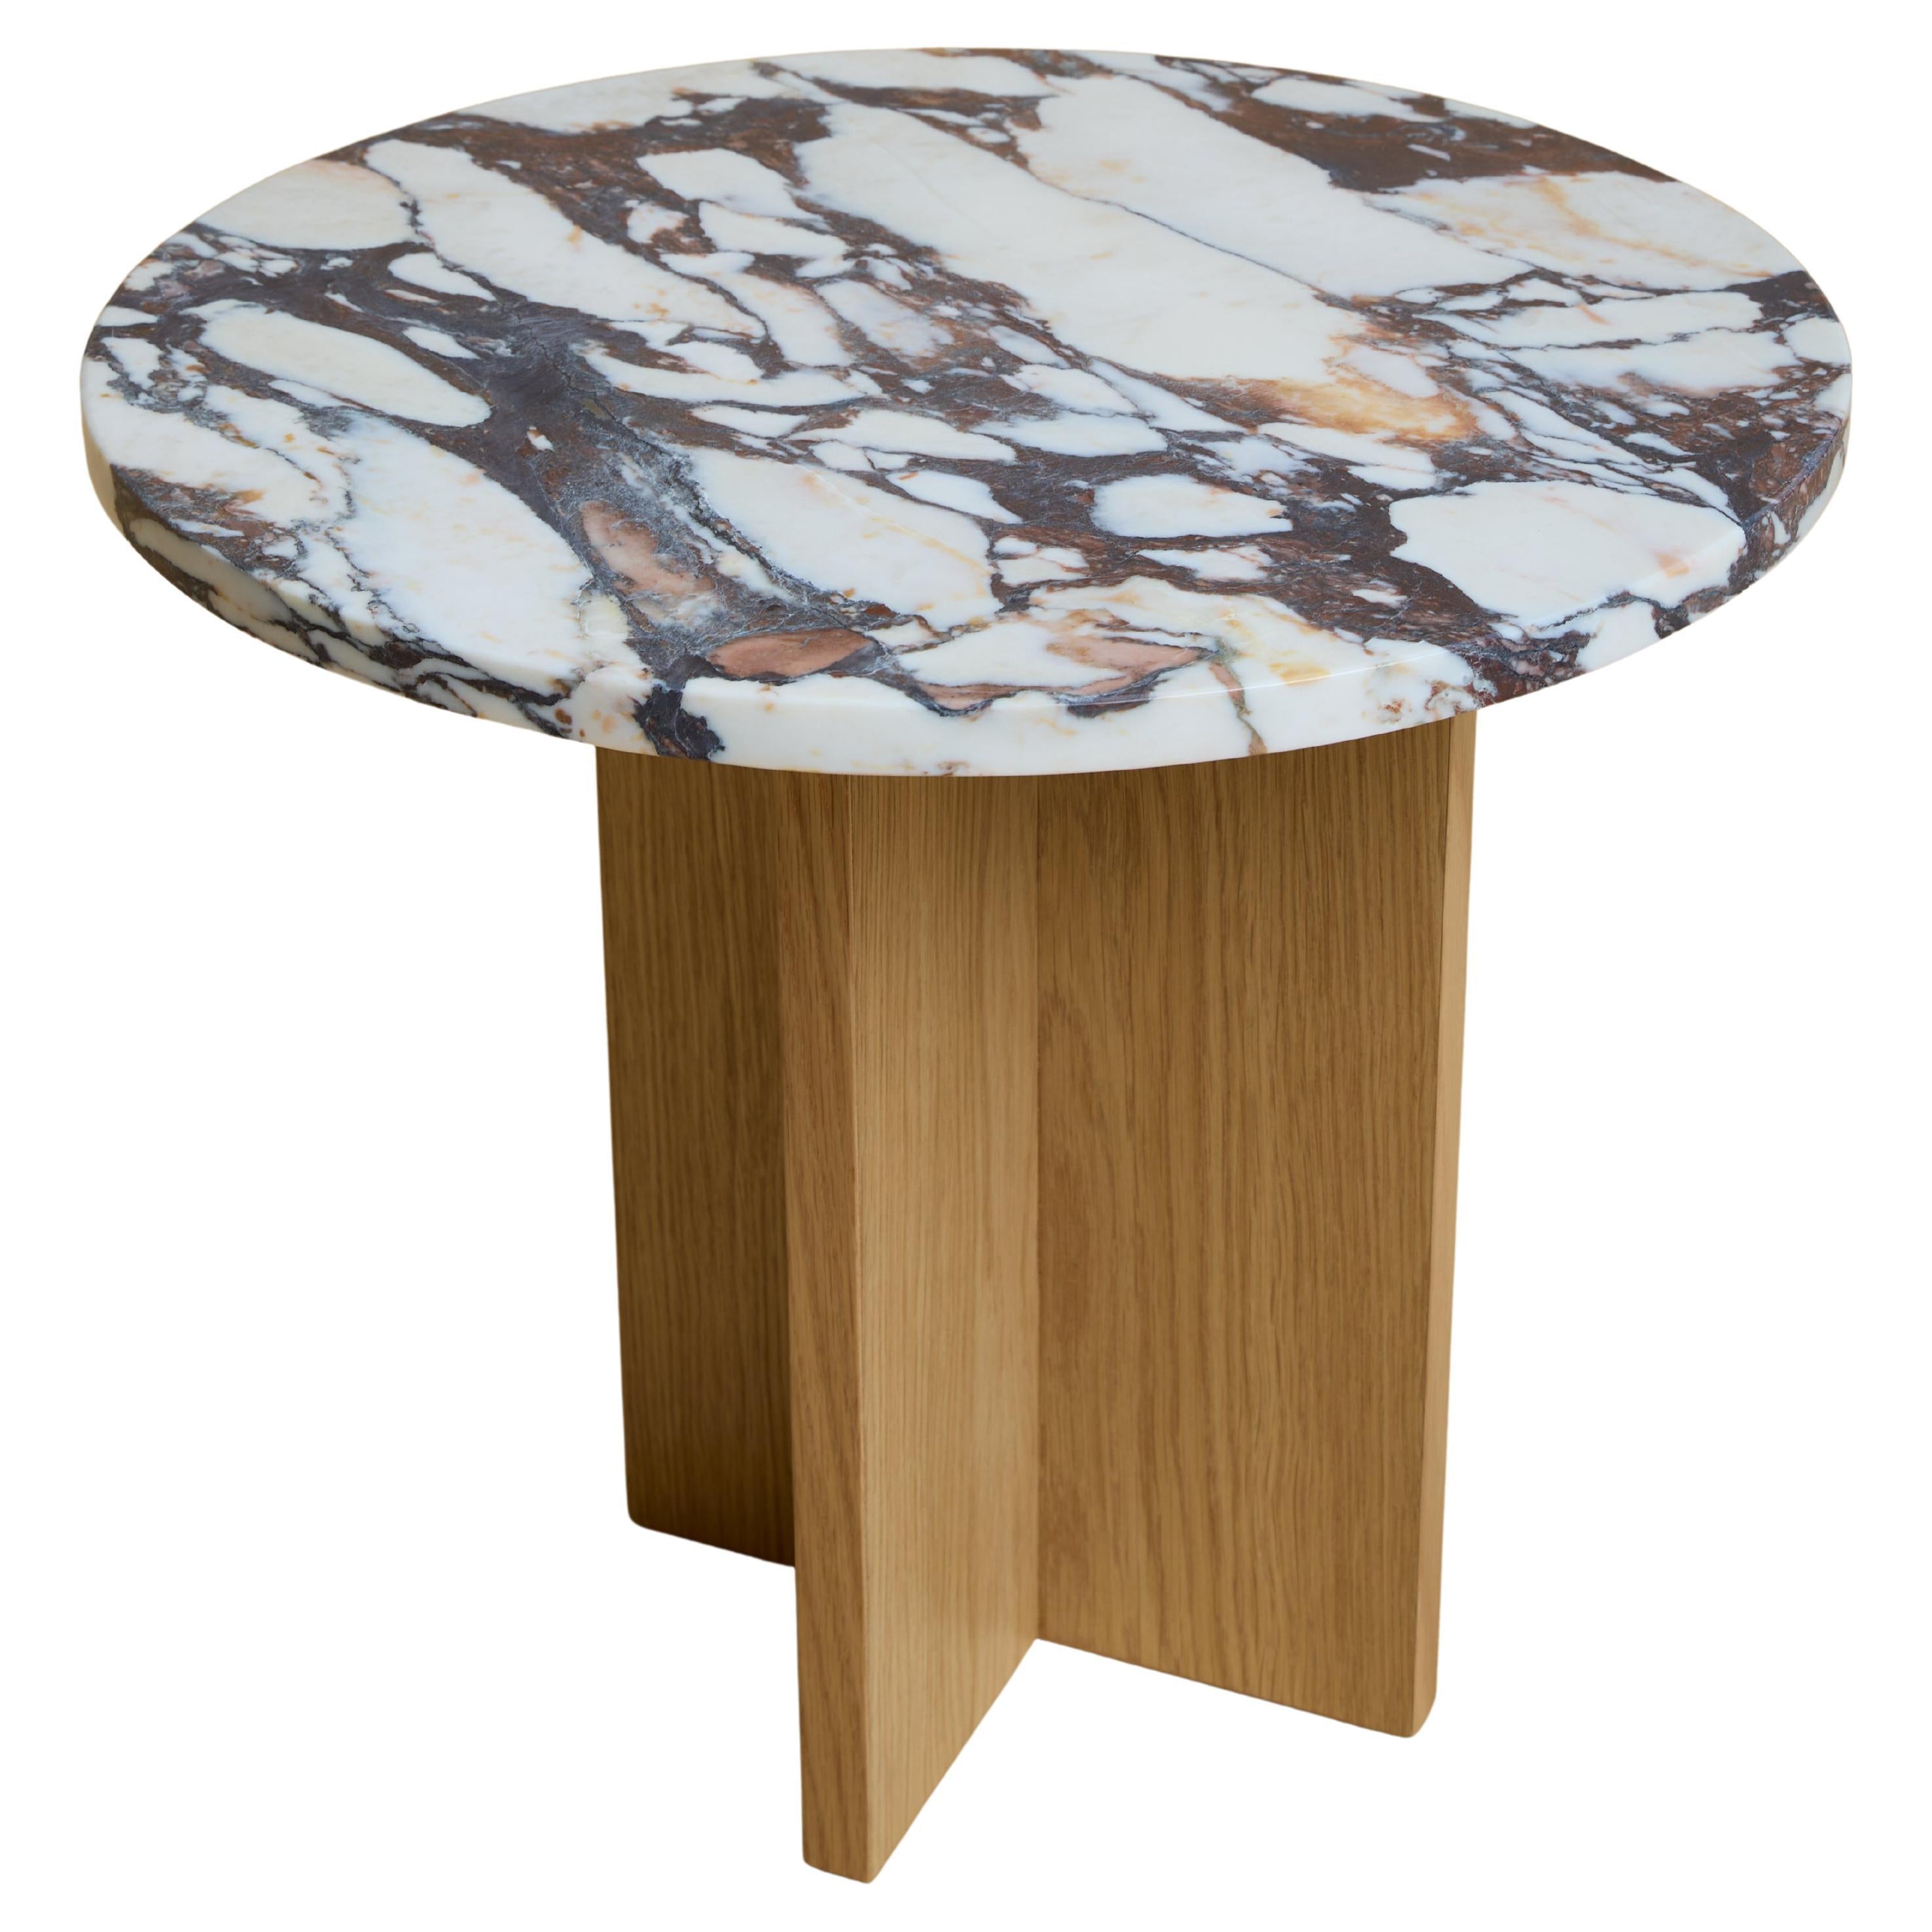 Calacatta Viola Marble Circular Coffee Table, Made in Italy For Sale